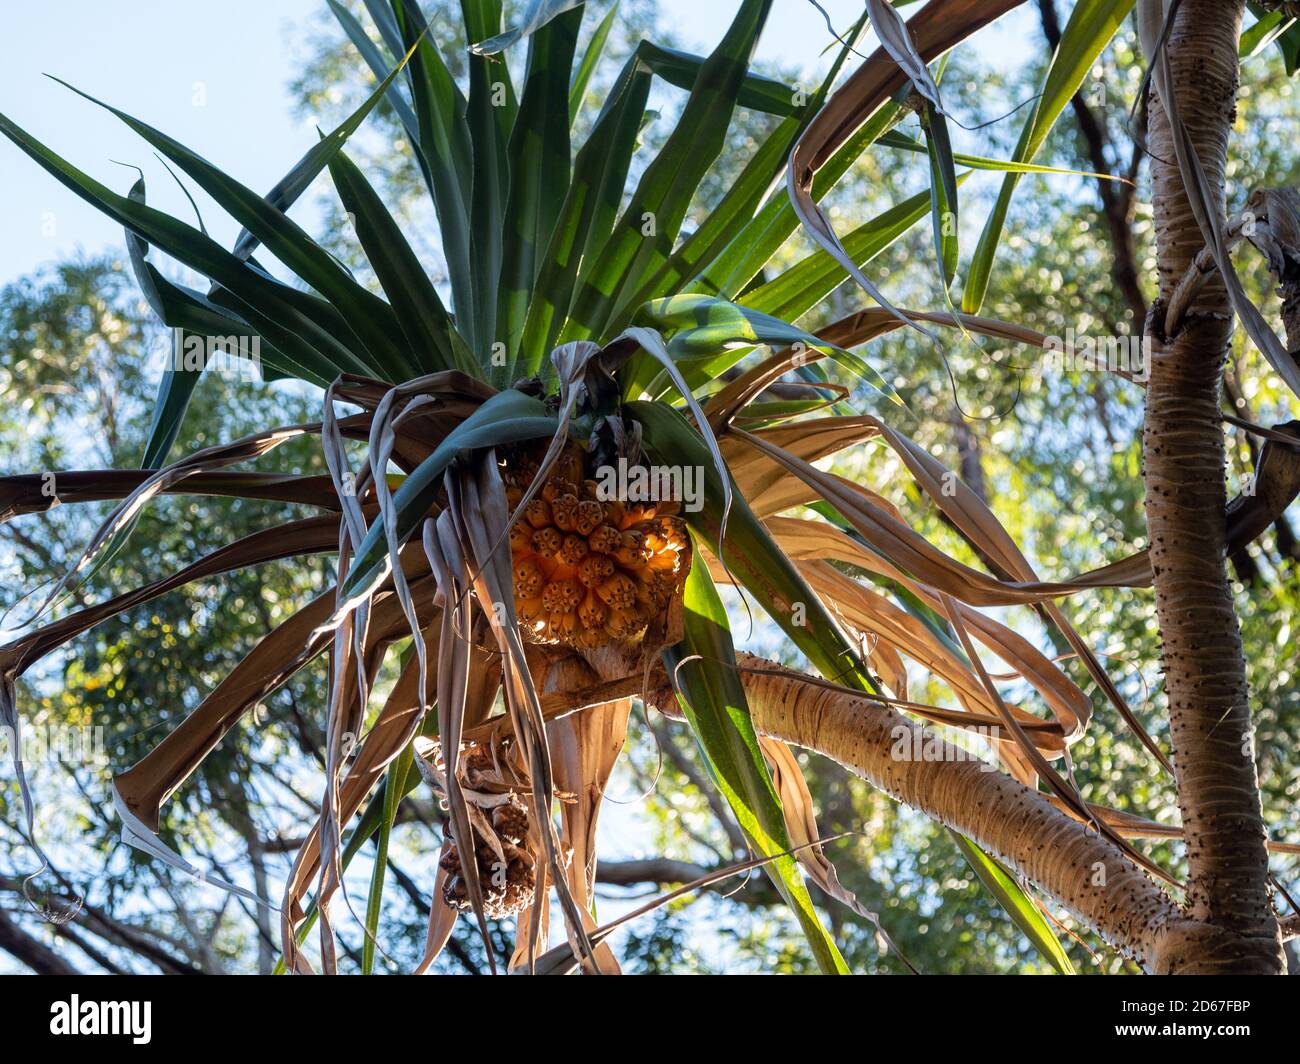 Sunlight shining on a Pandanus Palm tree with green leaves and Fruit whose segments contains seeds, blue sky, Coastal NSW Australia Stock Photo